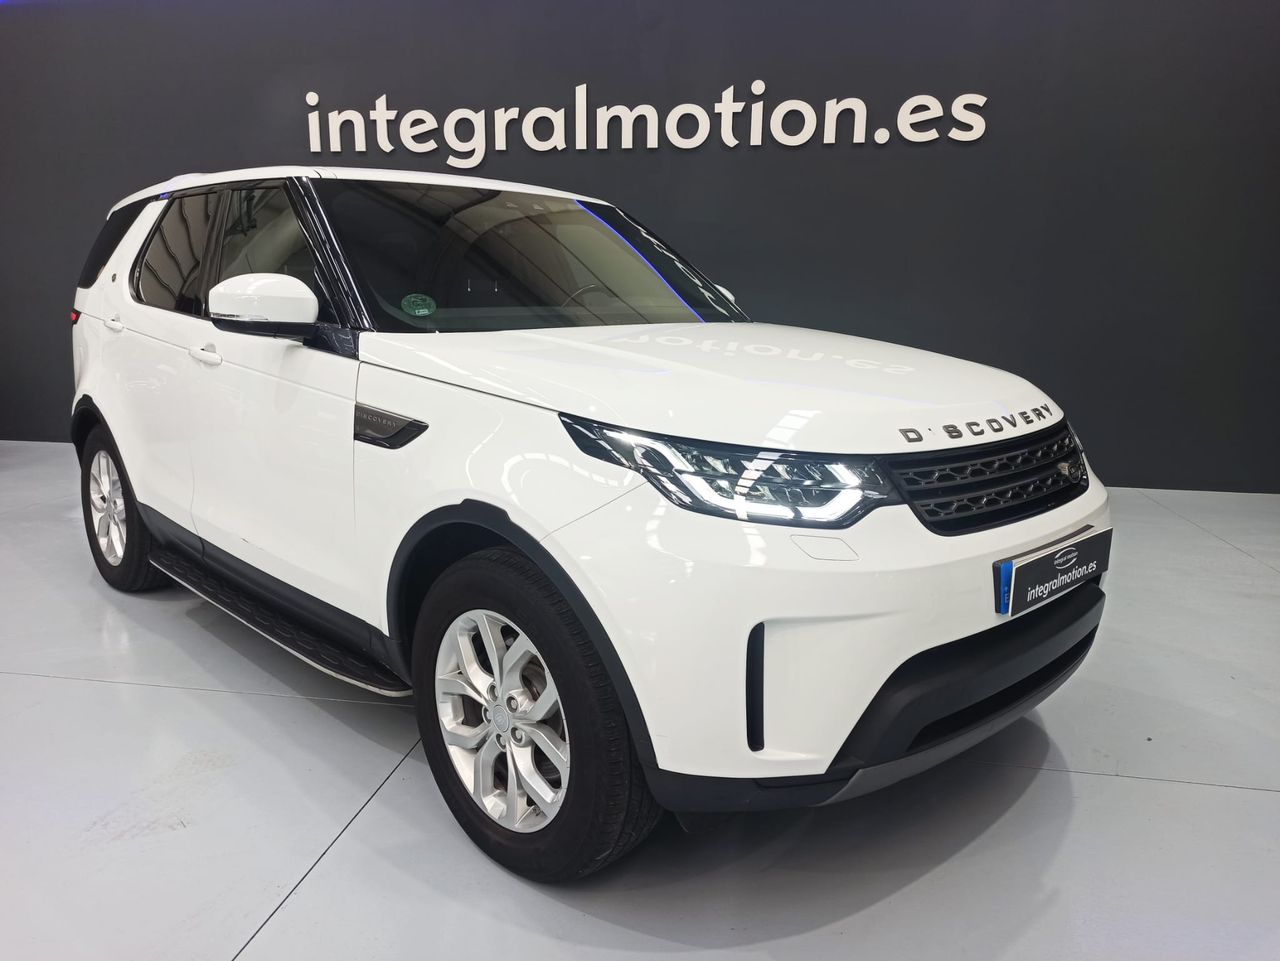 Foto Land-Rover Discovery 3